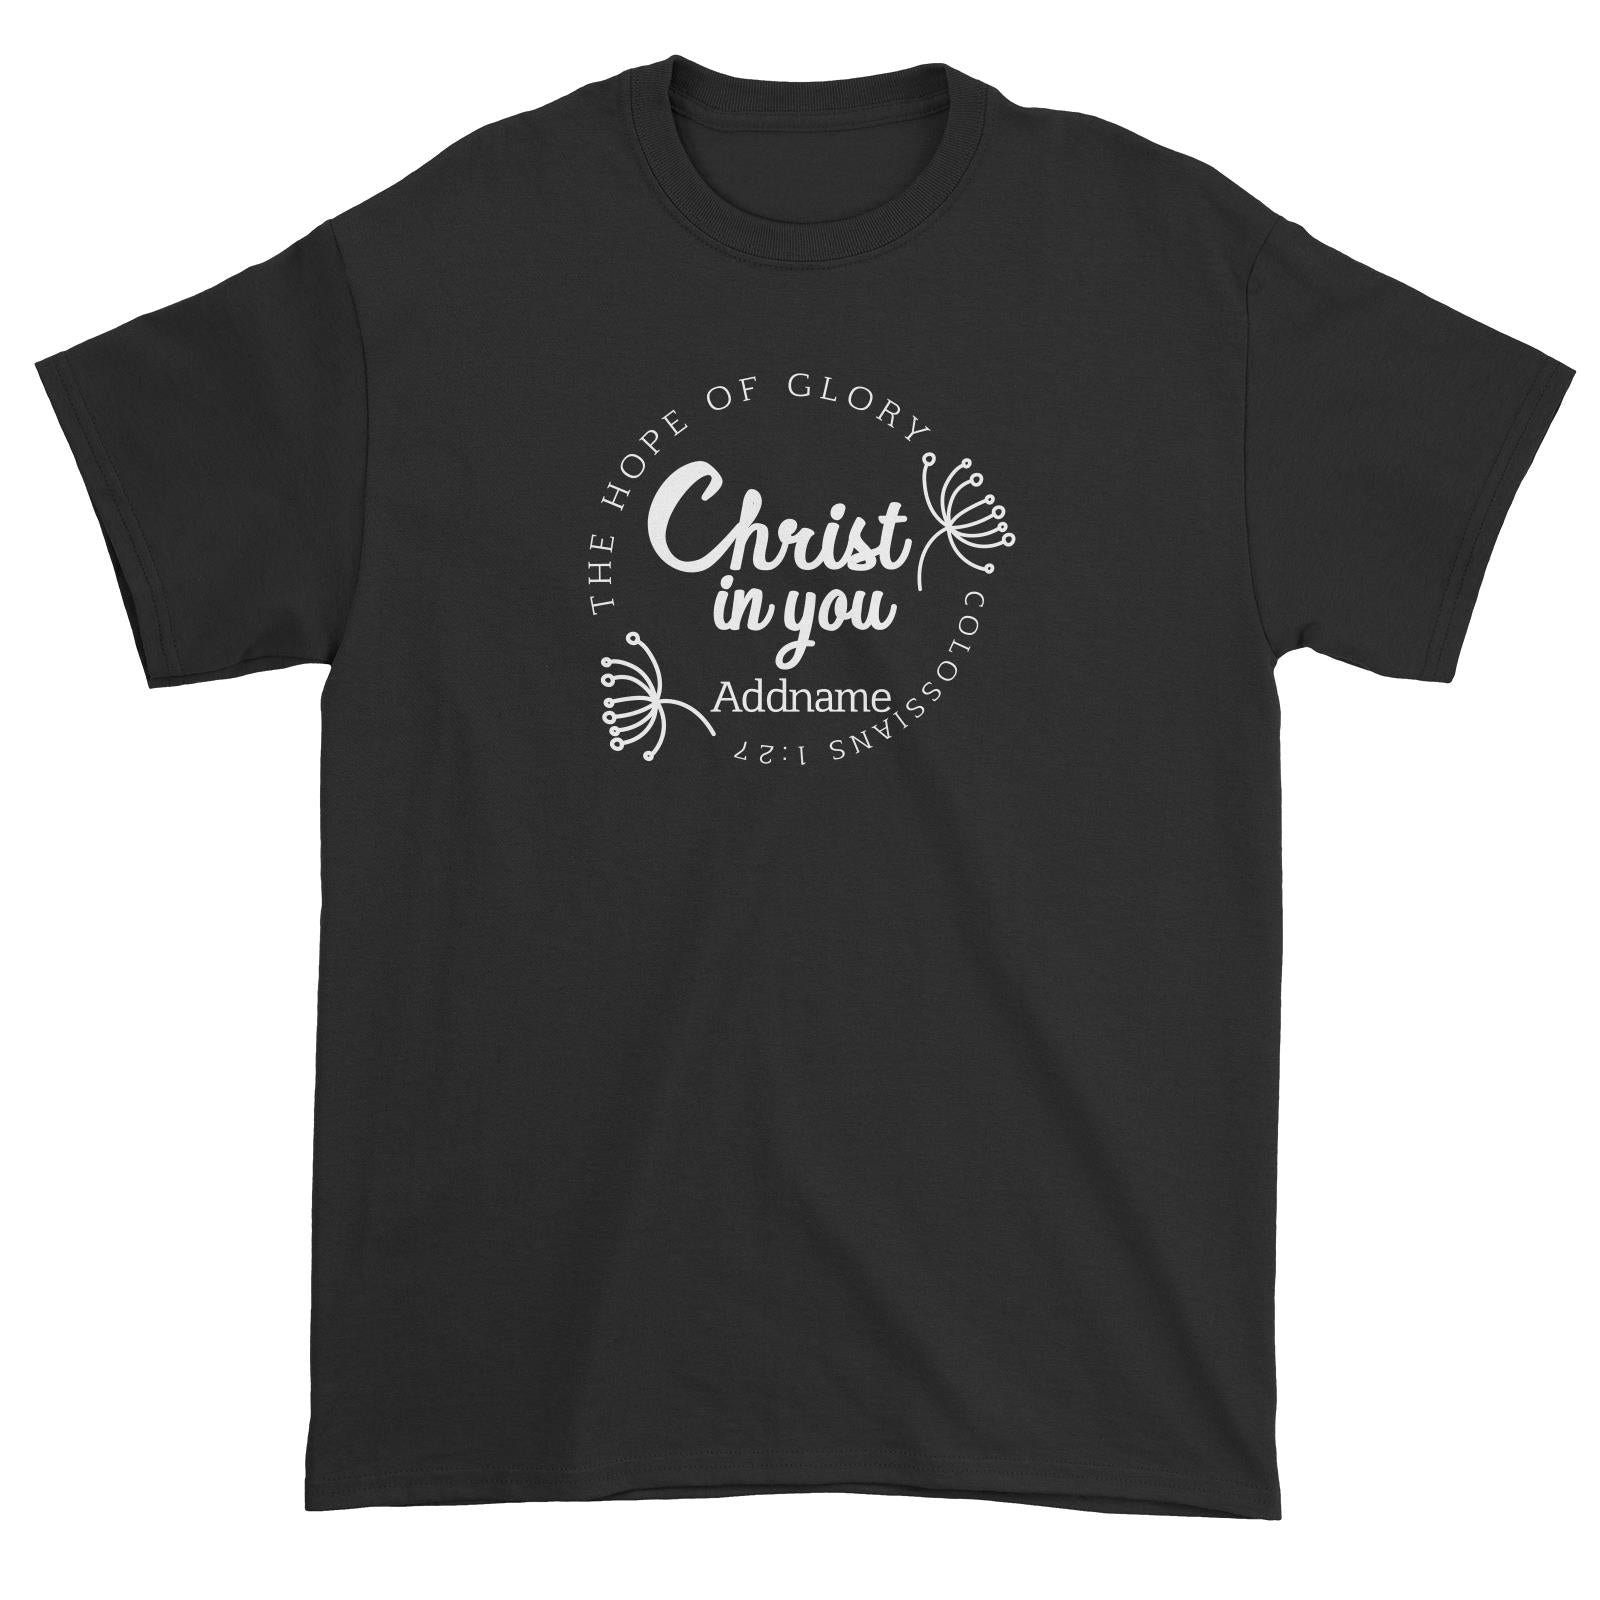 Christian Series The Hope Of Glory Christ In You Colossians 1.27 Addname Unisex T-Shirt